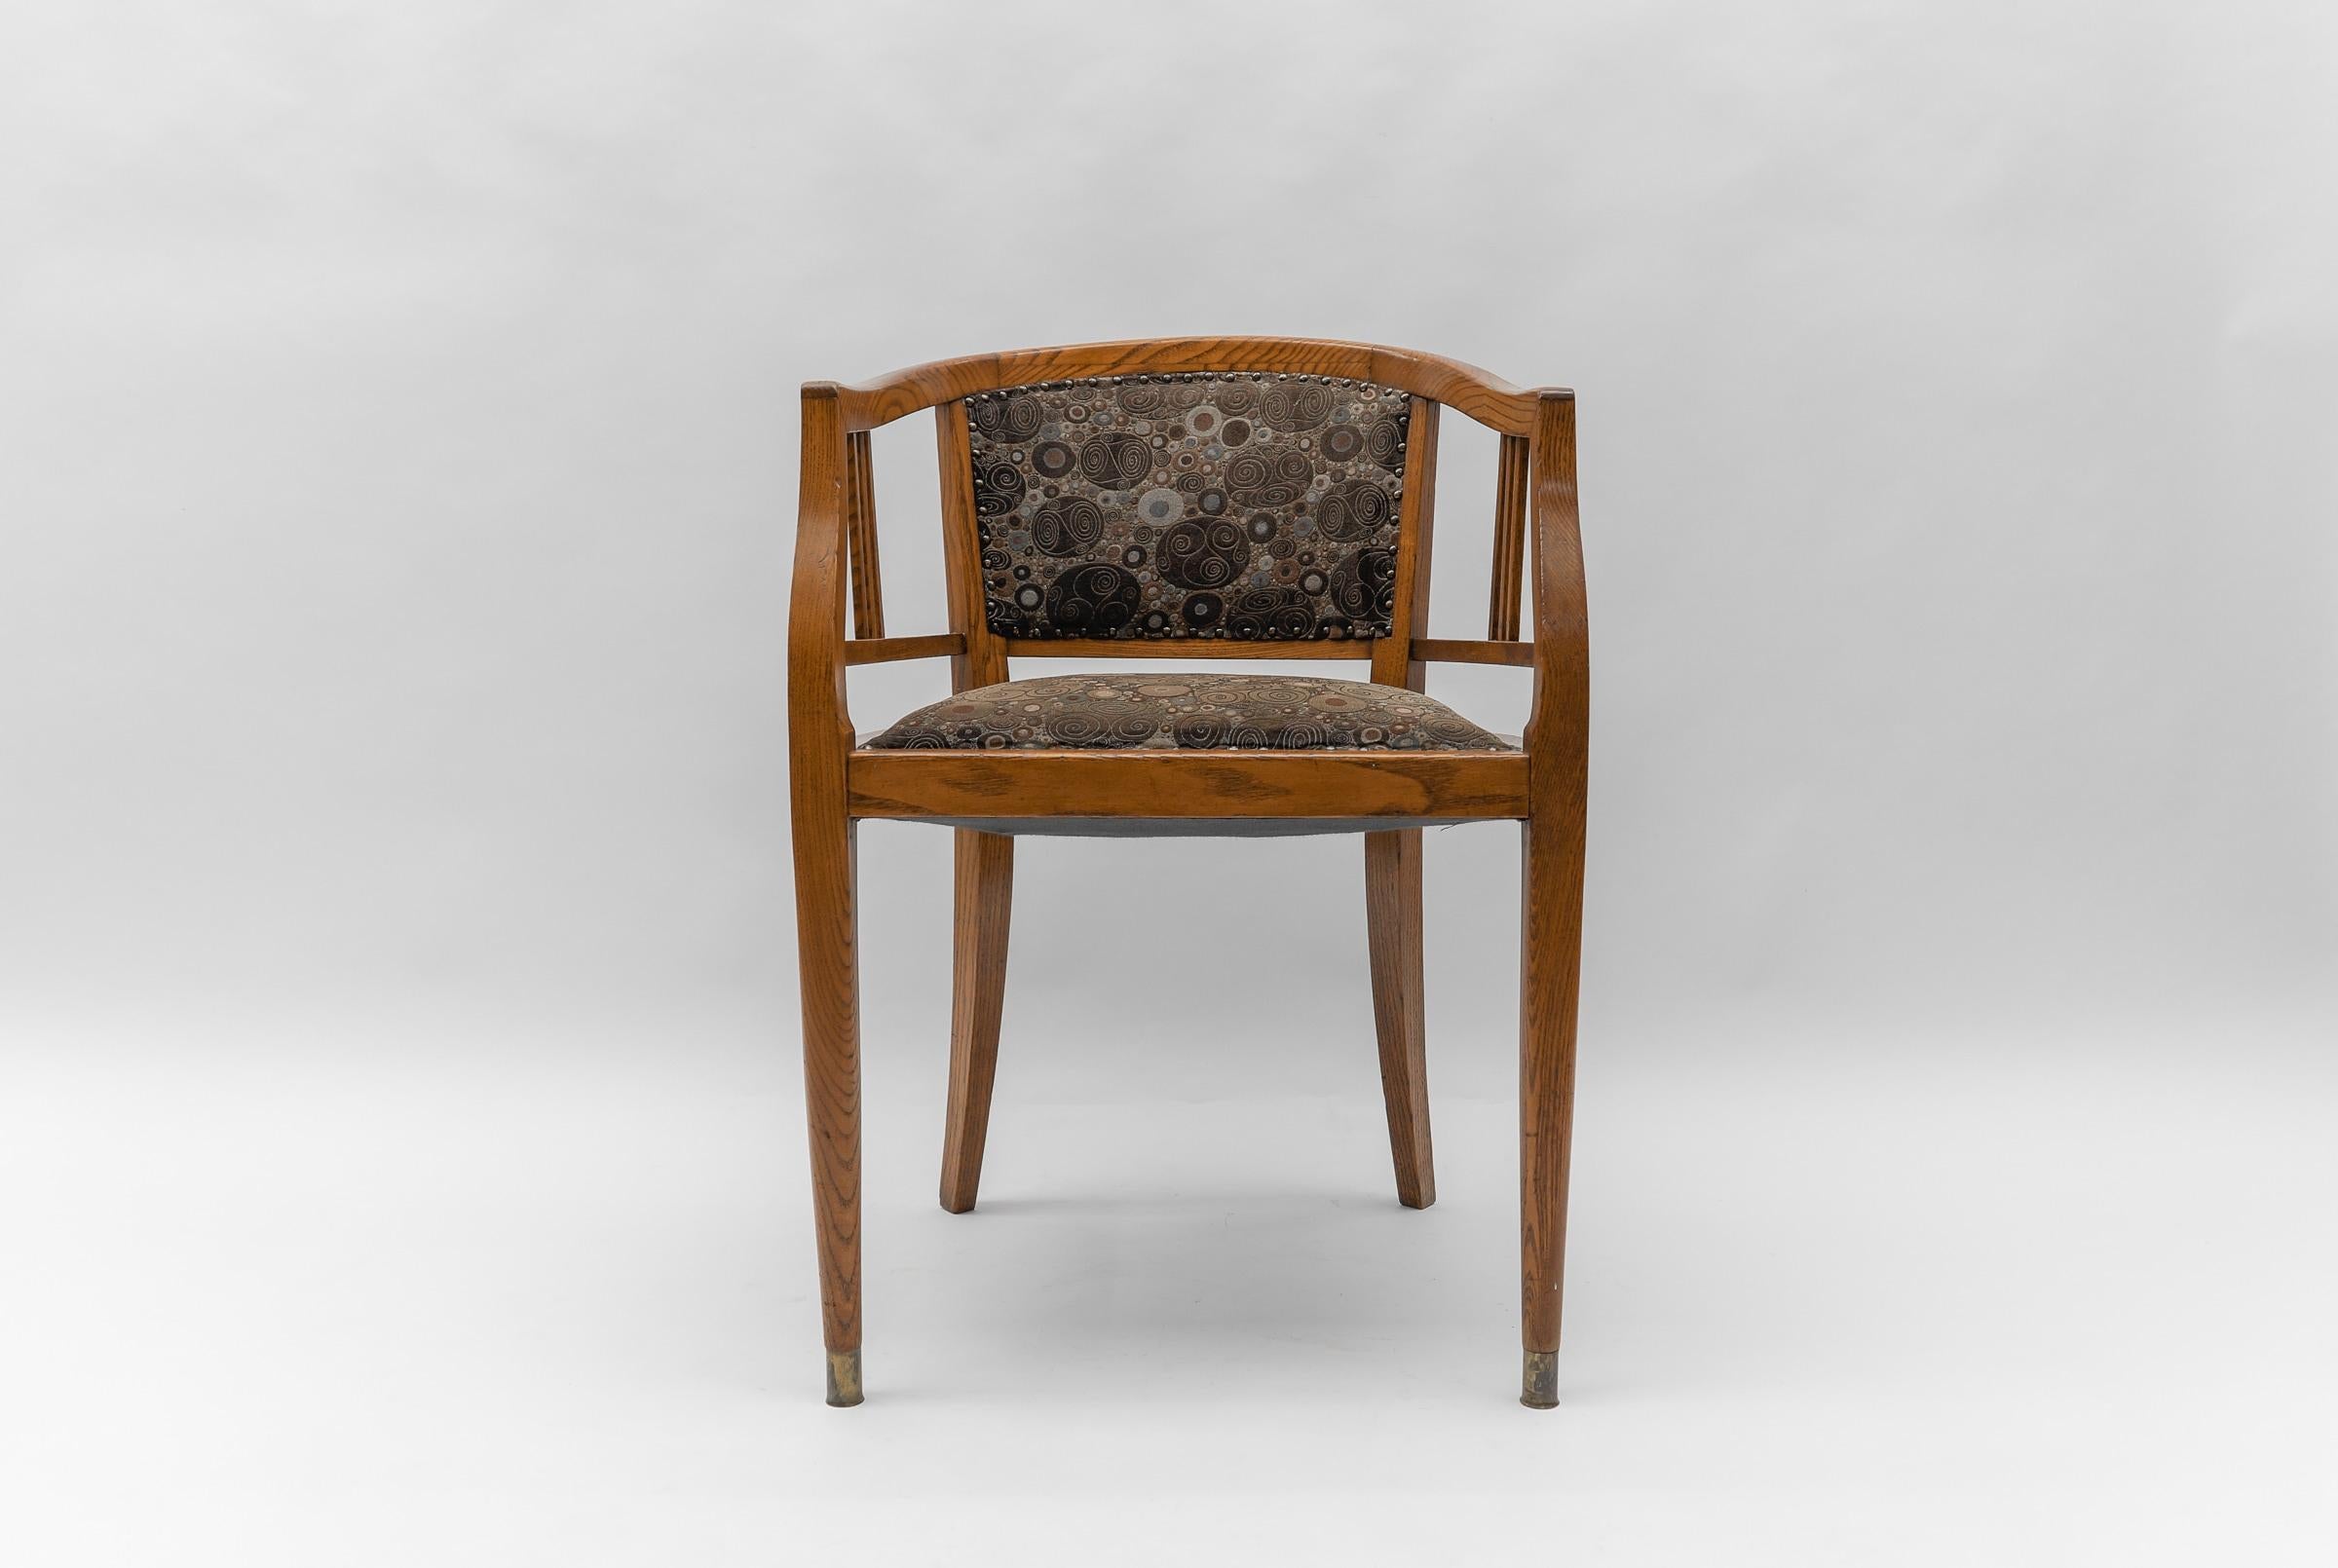 Beautiful high quality finish with brass end caps on the feet covered with original Gustav Klimt velvet upholstery fabric. Original metal springing on the seat. Naturally with signs of wear, but in good, solid condition. Ready to live in and use